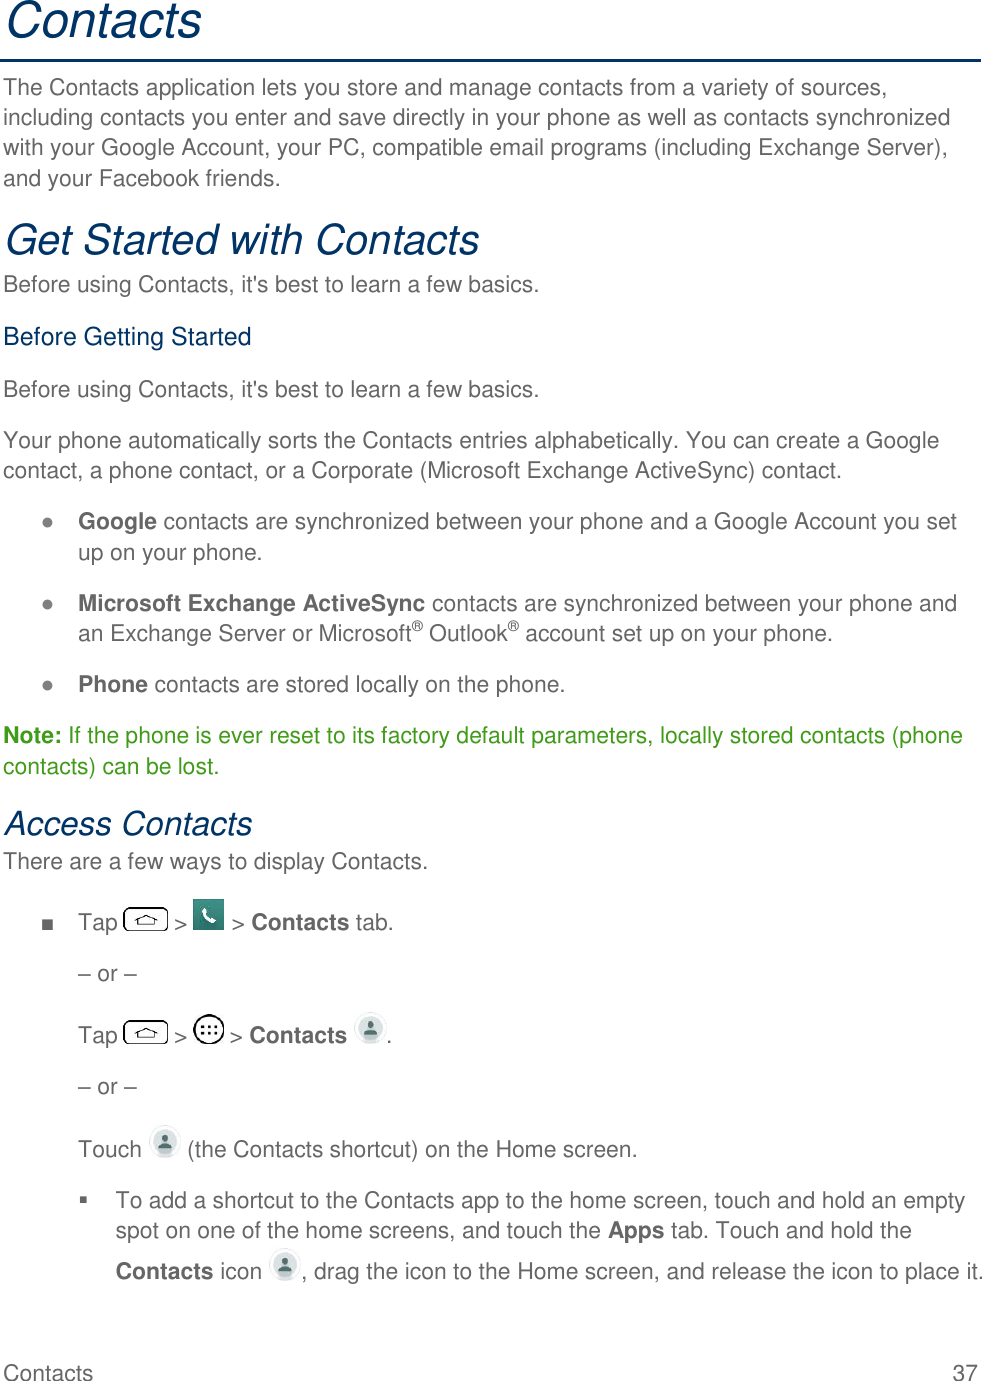 Contacts  37 Contacts The Contacts application lets you store and manage contacts from a variety of sources, including contacts you enter and save directly in your phone as well as contacts synchronized with your Google Account, your PC, compatible email programs (including Exchange Server), and your Facebook friends. Get Started with Contacts Before using Contacts, it&apos;s best to learn a few basics. Before Getting Started Before using Contacts, it&apos;s best to learn a few basics. Your phone automatically sorts the Contacts entries alphabetically. You can create a Google contact, a phone contact, or a Corporate (Microsoft Exchange ActiveSync) contact. ● Google contacts are synchronized between your phone and a Google Account you set up on your phone. ● Microsoft Exchange ActiveSync contacts are synchronized between your phone and an Exchange Server or Microsoft® Outlook® account set up on your phone. ● Phone contacts are stored locally on the phone. Note: If the phone is ever reset to its factory default parameters, locally stored contacts (phone contacts) can be lost. Access Contacts There are a few ways to display Contacts. ■  Tap   &gt;   &gt; Contacts tab. – or – Tap   &gt;   &gt; Contacts  . – or – Touch   (the Contacts shortcut) on the Home screen.   To add a shortcut to the Contacts app to the home screen, touch and hold an empty spot on one of the home screens, and touch the Apps tab. Touch and hold the Contacts icon  , drag the icon to the Home screen, and release the icon to place it. 